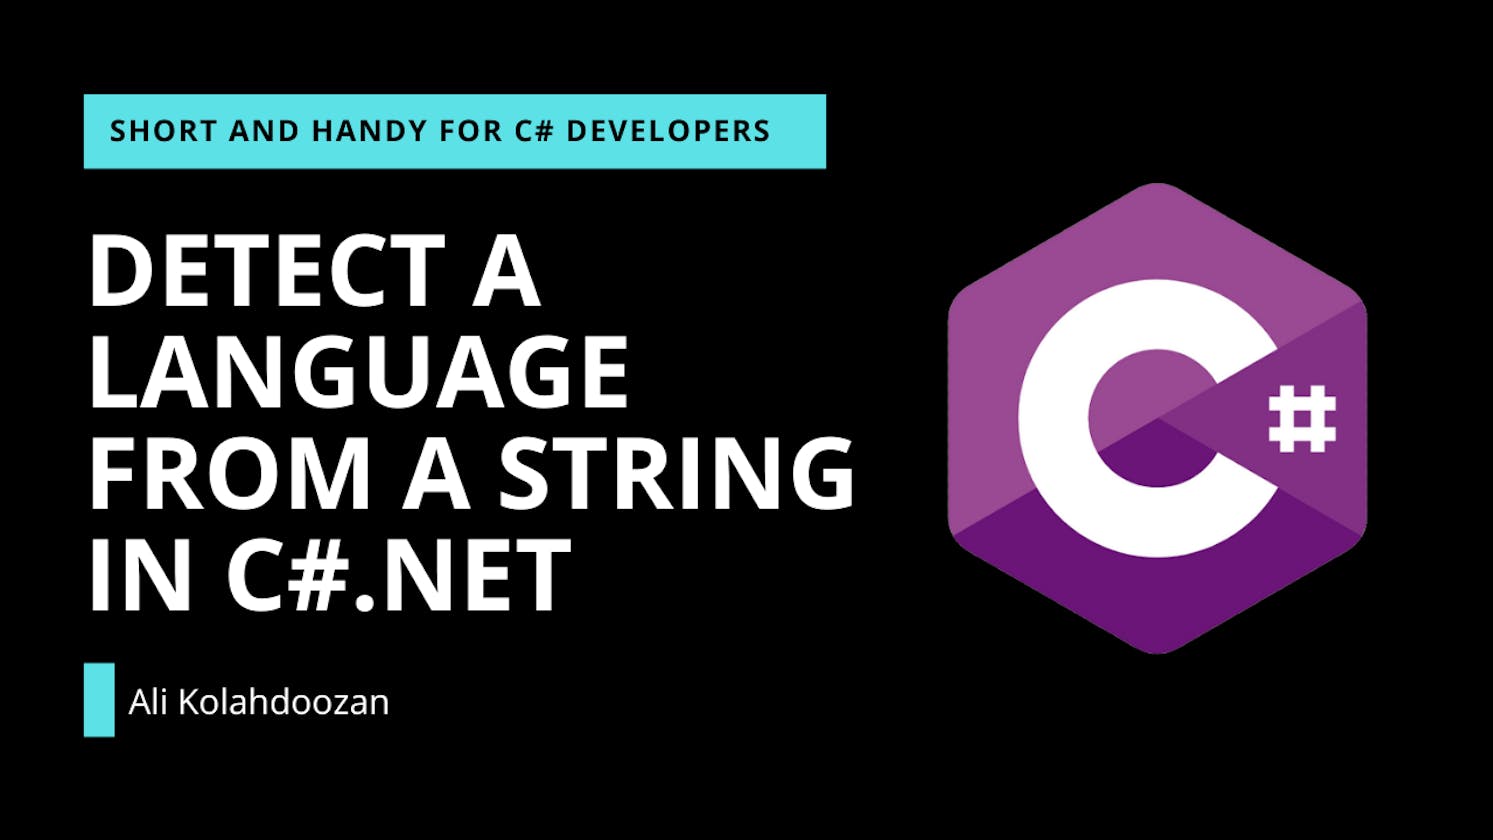 Detect a language from a string in C#.NET